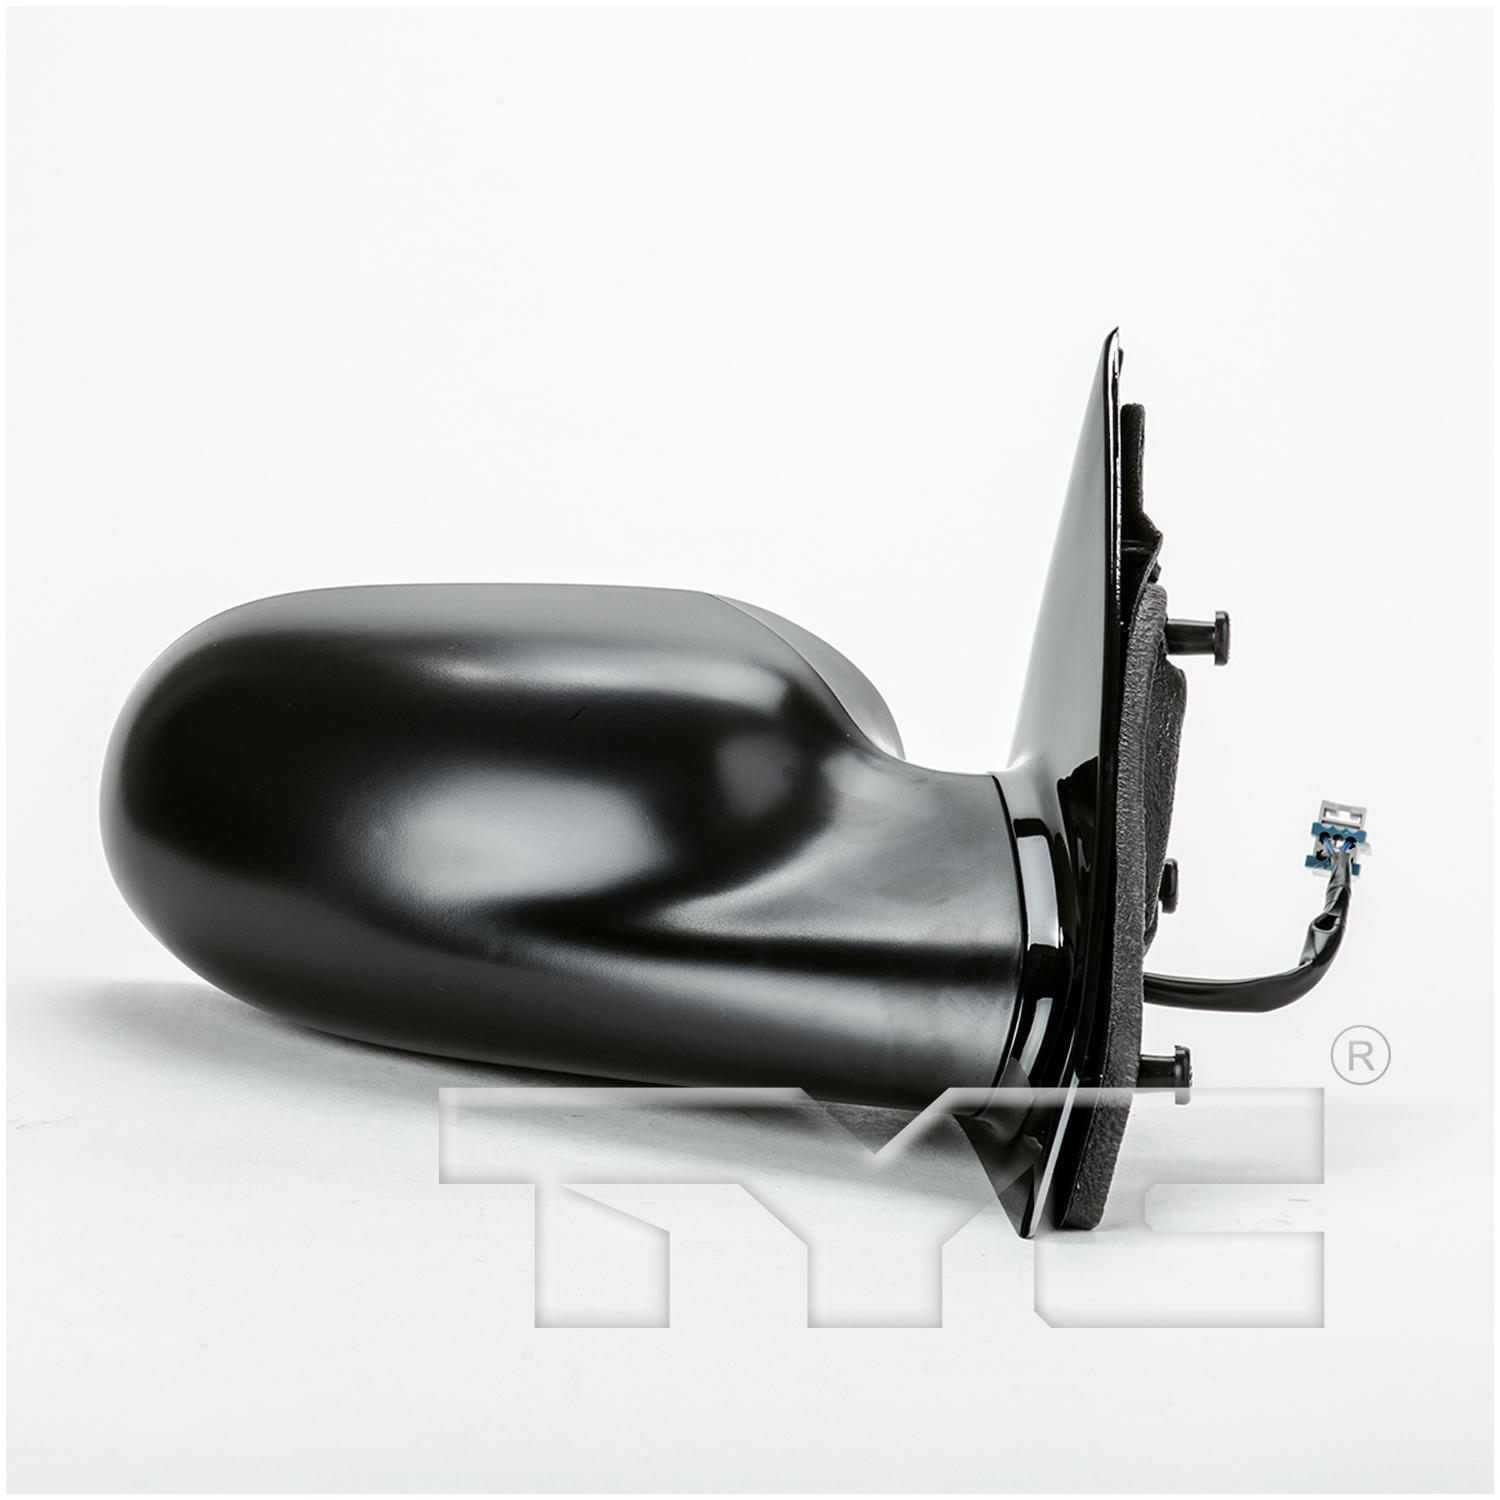 Aftermarket MIRRORS for SATURN - L300, L300,04-05,RT Mirror outside rear view